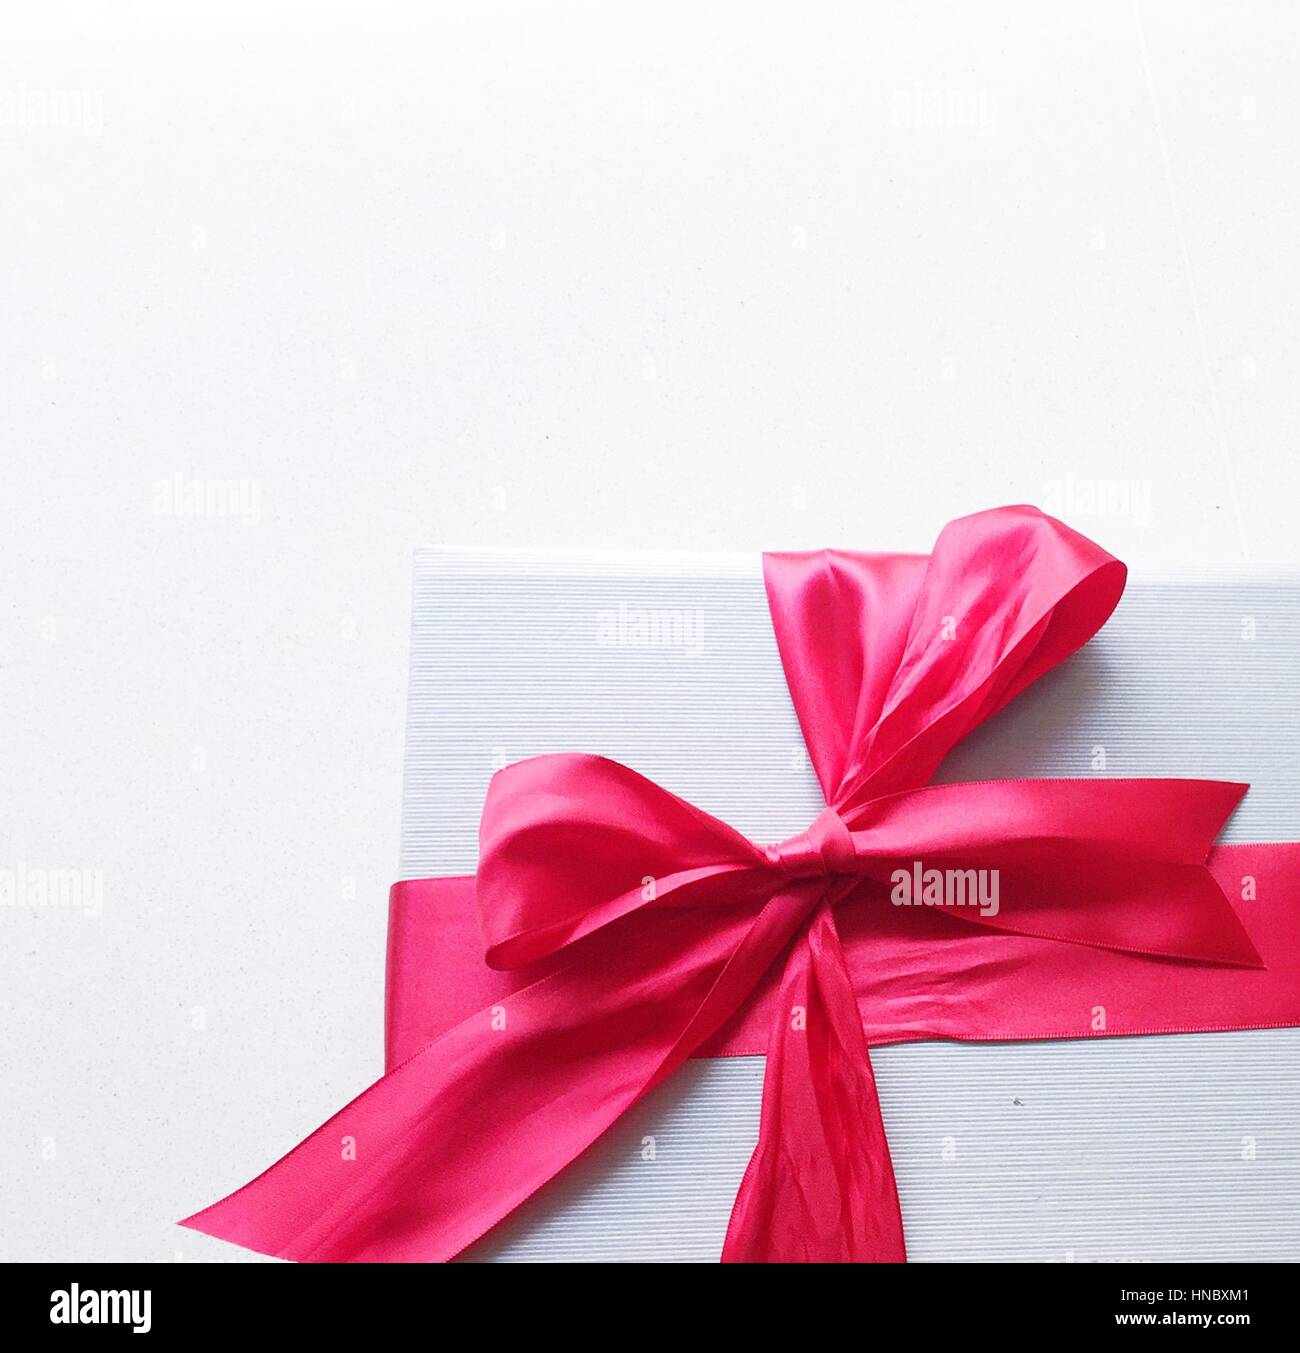 Close-up of a gift wrapped avec noeud rose Banque D'Images